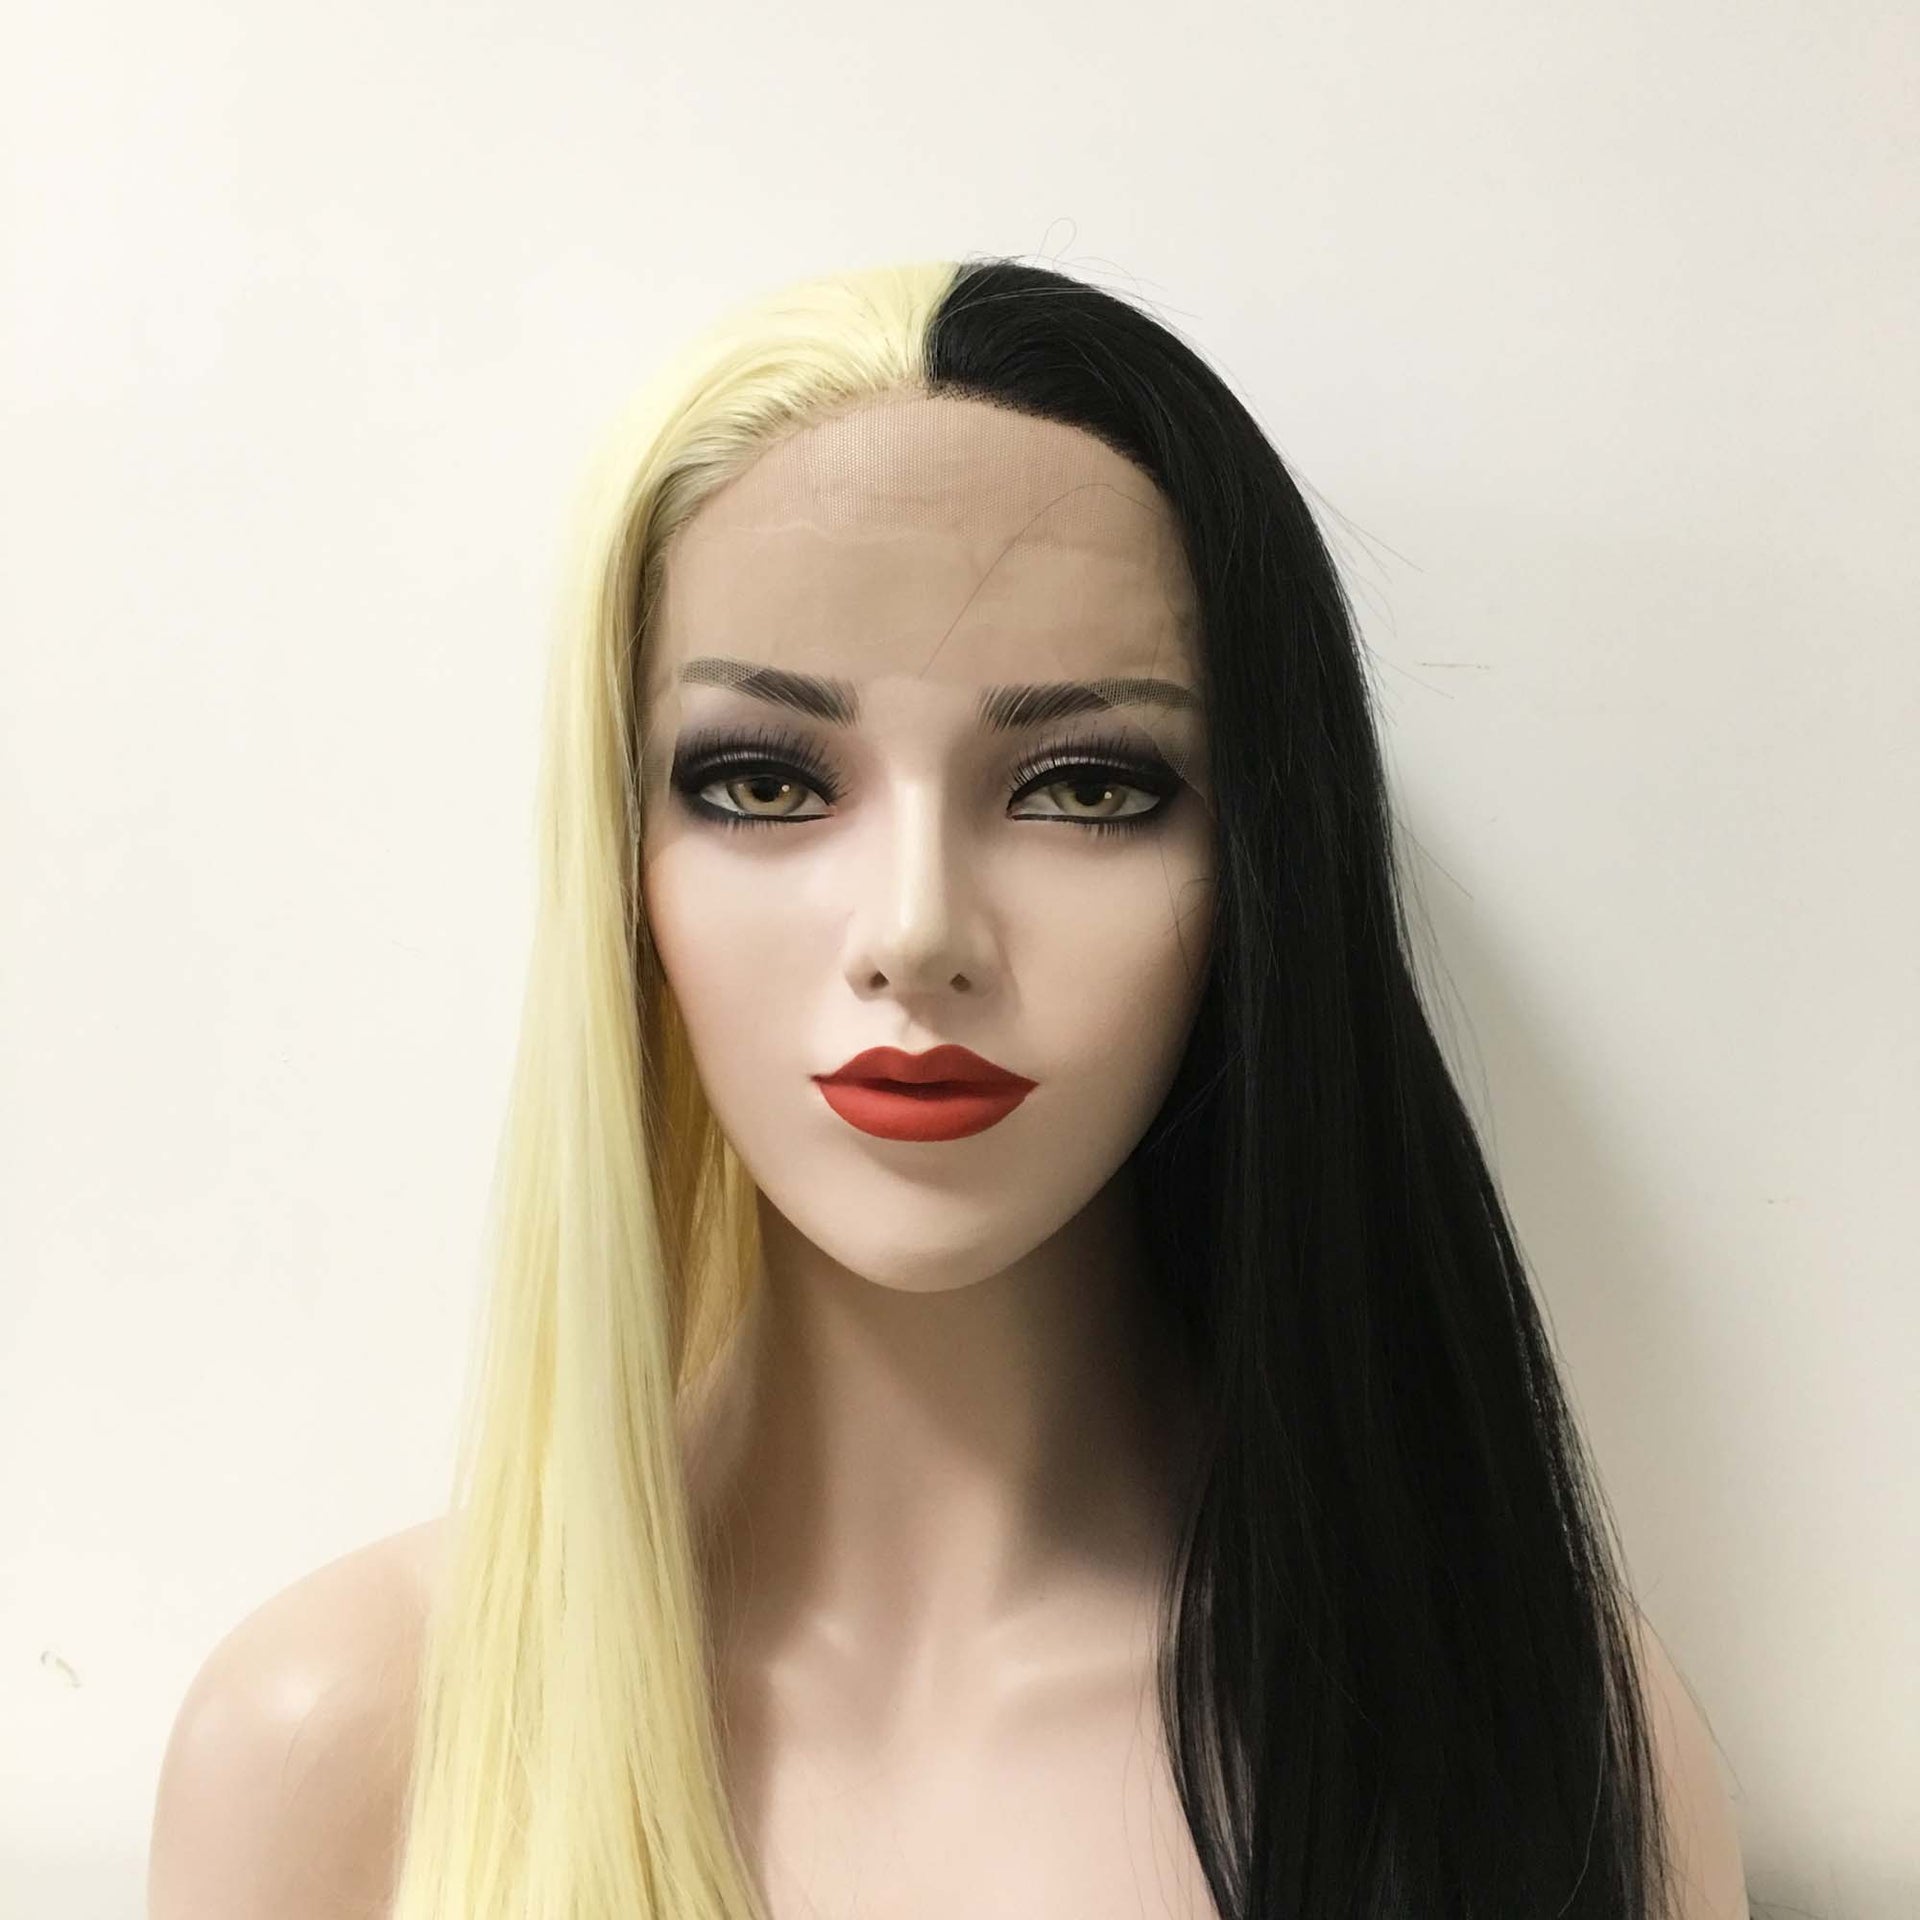 nevermindyrhead Women Lace Front Black Blonde Two Tone Middle Part Long Straight Hair Cosplay Party Wig